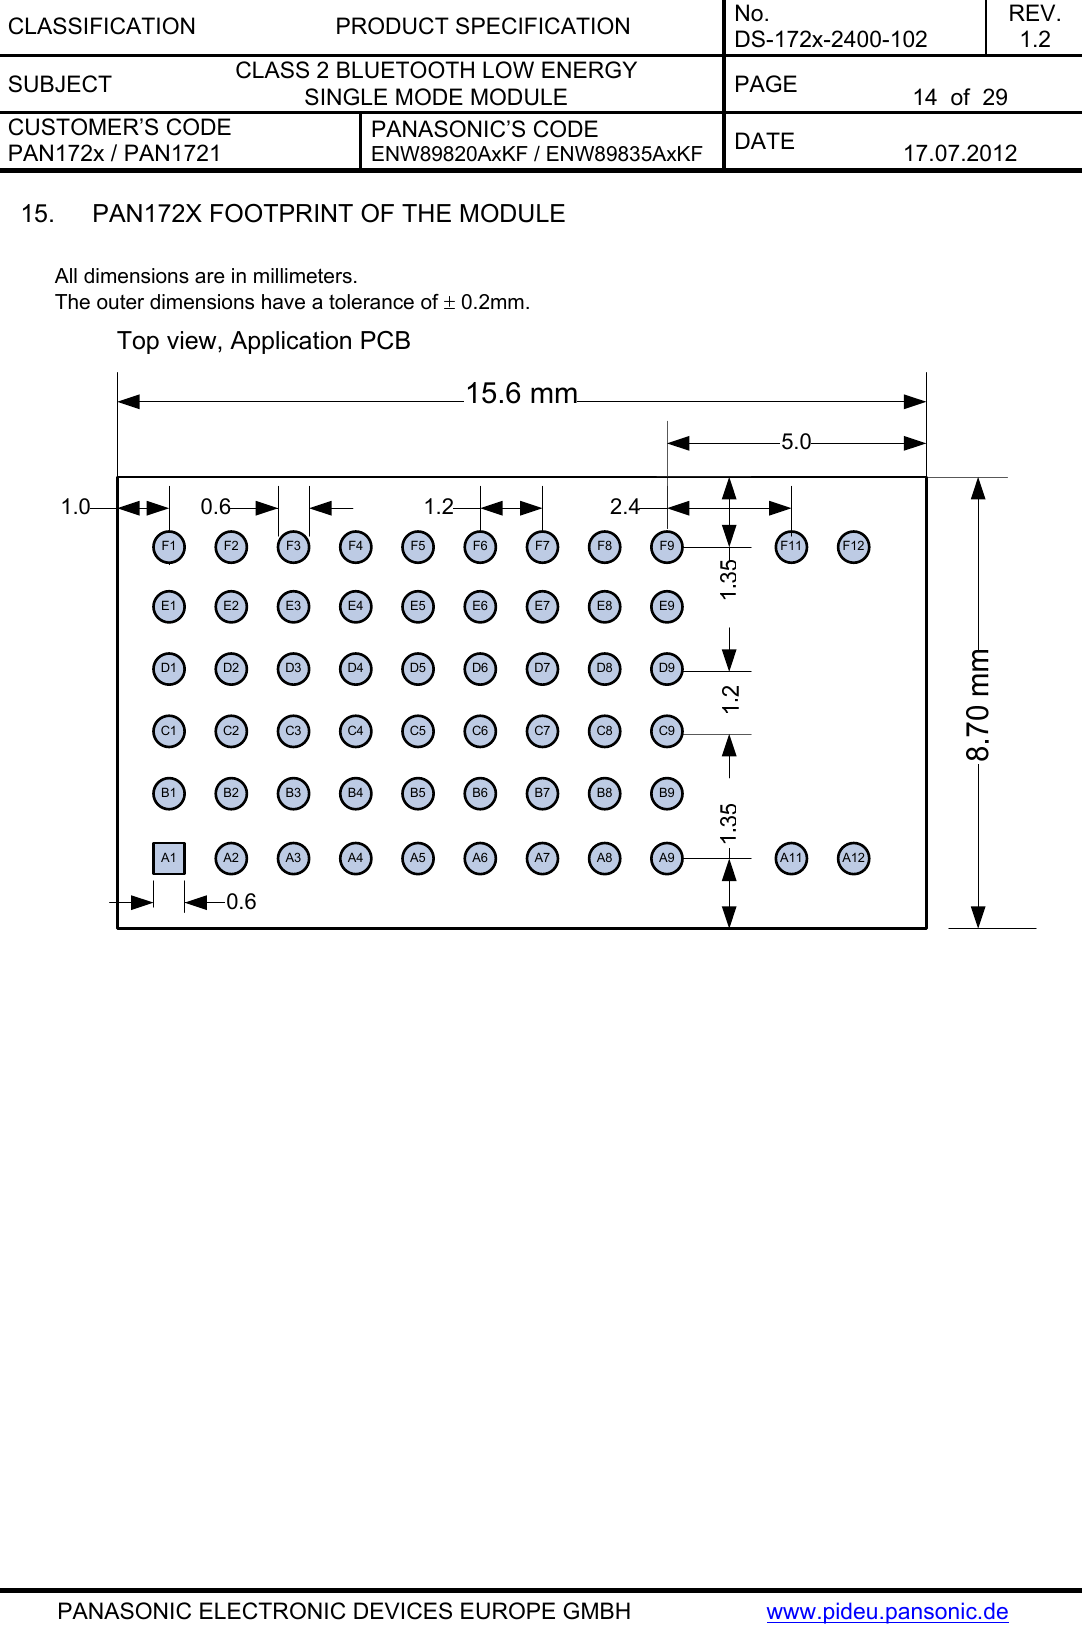 CLASSIFICATION PRODUCT SPECIFICATION No. DS-172x-2400-102 REV. 1.2 SUBJECT  CLASS 2 BLUETOOTH LOW ENERGY  SINGLE MODE MODULE  PAGE   14  of  29 CUSTOMER’S CODE PAN172x / PAN1721 PANASONIC’S CODE ENW89820AxKF / ENW89835AxKF  DATE   17.07.2012   PANASONIC ELECTRONIC DEVICES EUROPE GMBH  www.pideu.pansonic.de 15.  72X FOOTPRINT OF THE MODULE PAN1 All dimensions are in millimeters. The outer dimensions have a tolerance of ± 0.2mm. Top view, Application PCB F2 F3 F4 F5E1 E2 E3 E4 E5 E6 E7 E8 E9D1 D2 D3 D4 D5 D6 D7 D8C1 C2 C3 C4 C5 C6 C7 C8B1 B2 B3 B4 B5 B6 B7 B8 B9A2 A3 A4 A5 A6 A7 A8A11.0 0.65.00.6F91.2F7F1 F8D9C9A915.6 mmF6 F11A11F12A122.4  